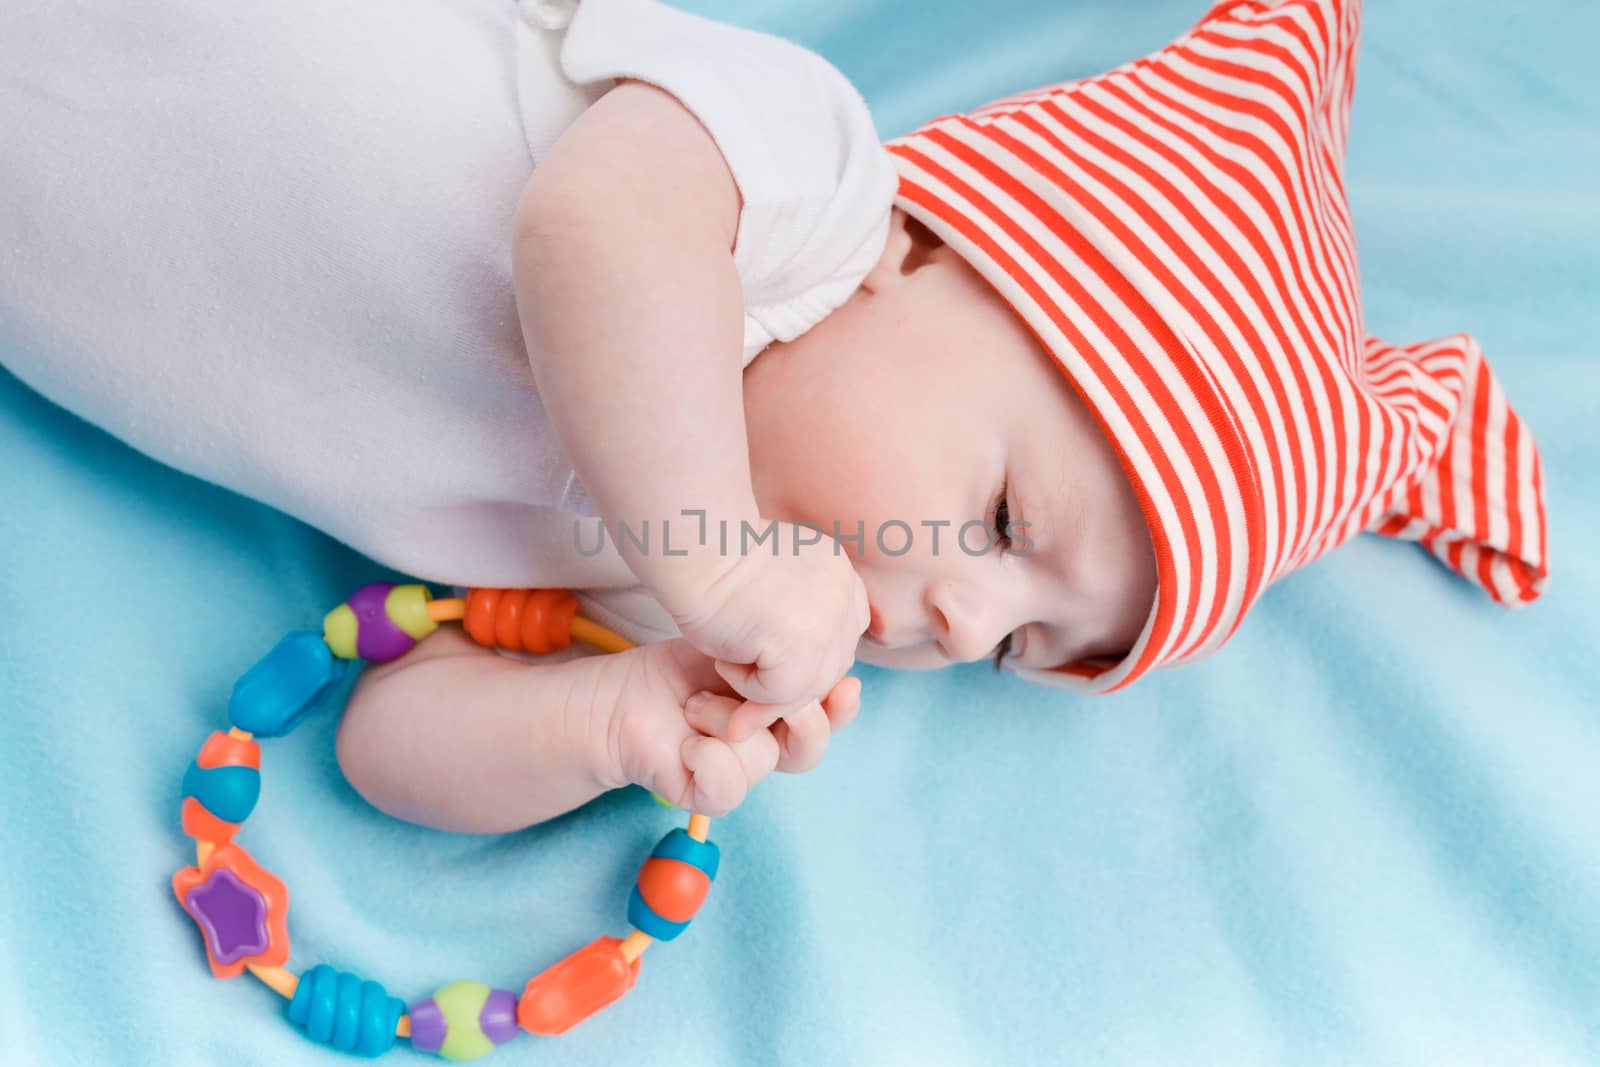 Baby in hat lying on a blue plaid